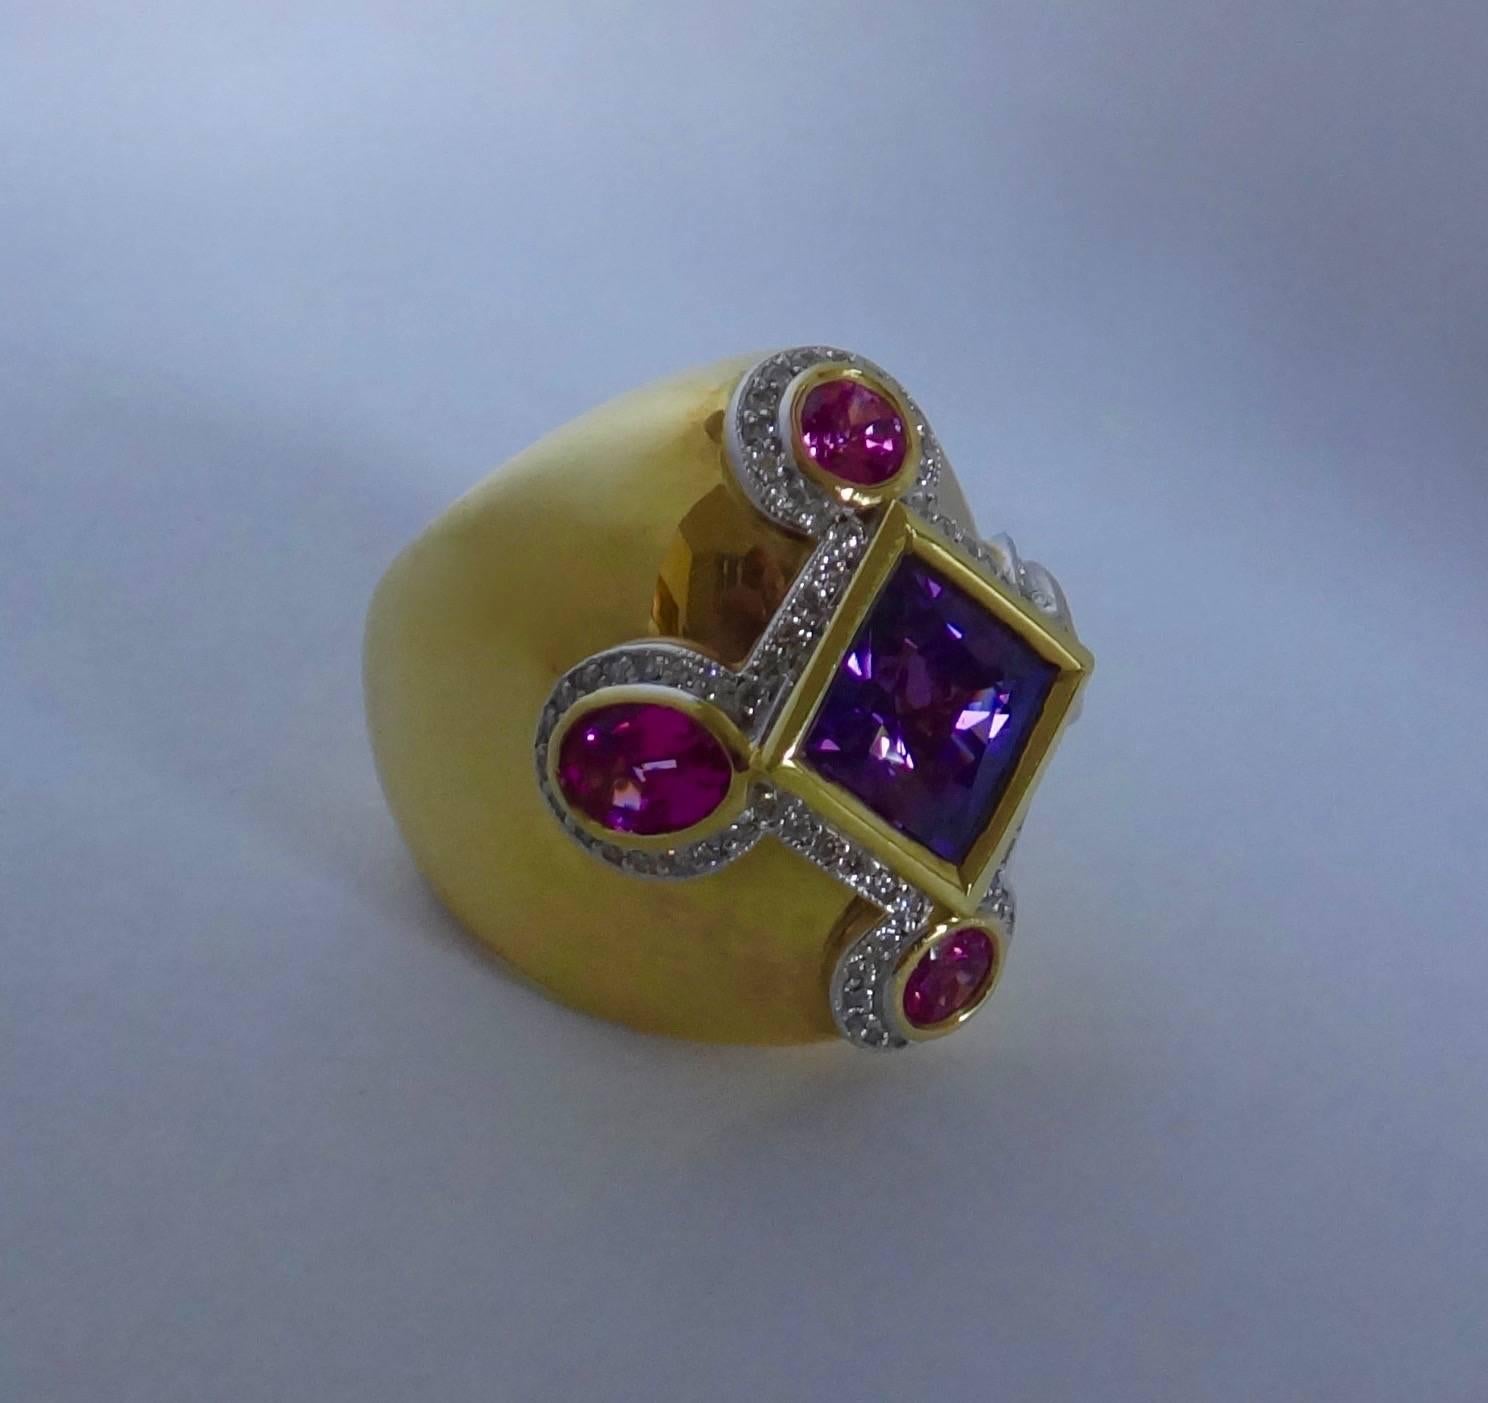 This one-of-a-kind dome ring showcases a square cut purple spinel flanked by round and oval cut pink spinels (Origin: Sri Lanka).  Highlighting the five gems is a frame of pave set, brillant cut white diamonds.  The hand crafted, highly polished 18k